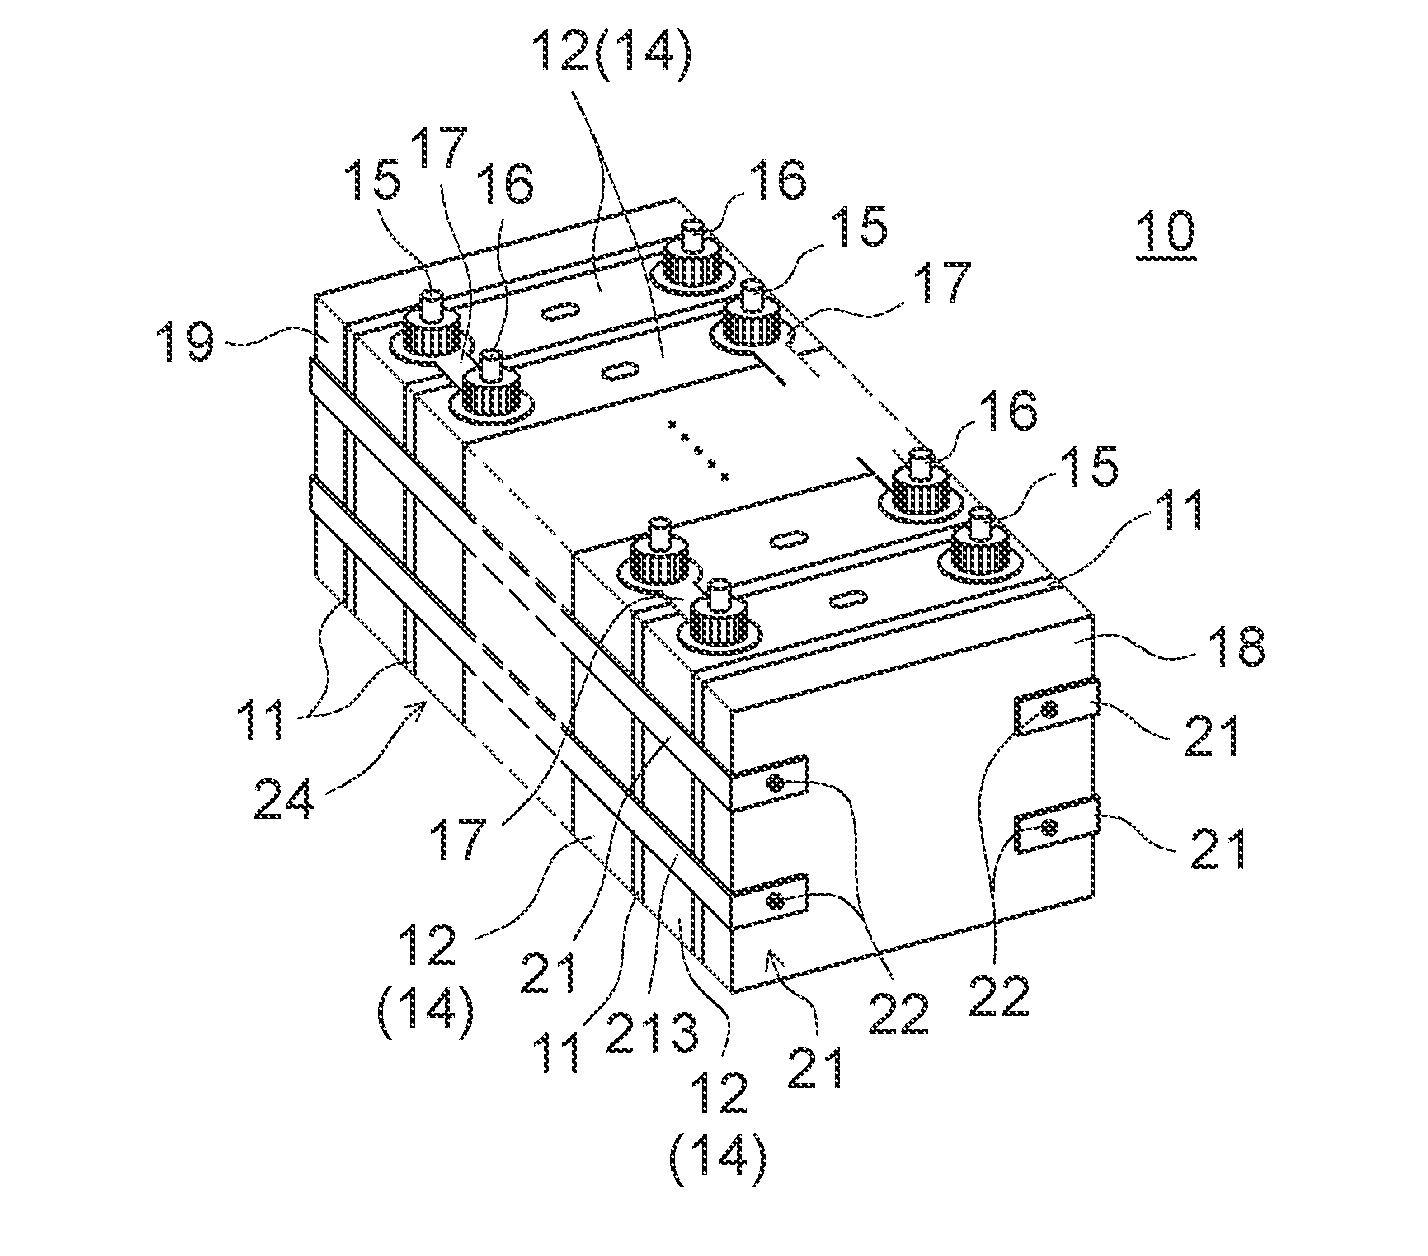 Producing method of assembled battery